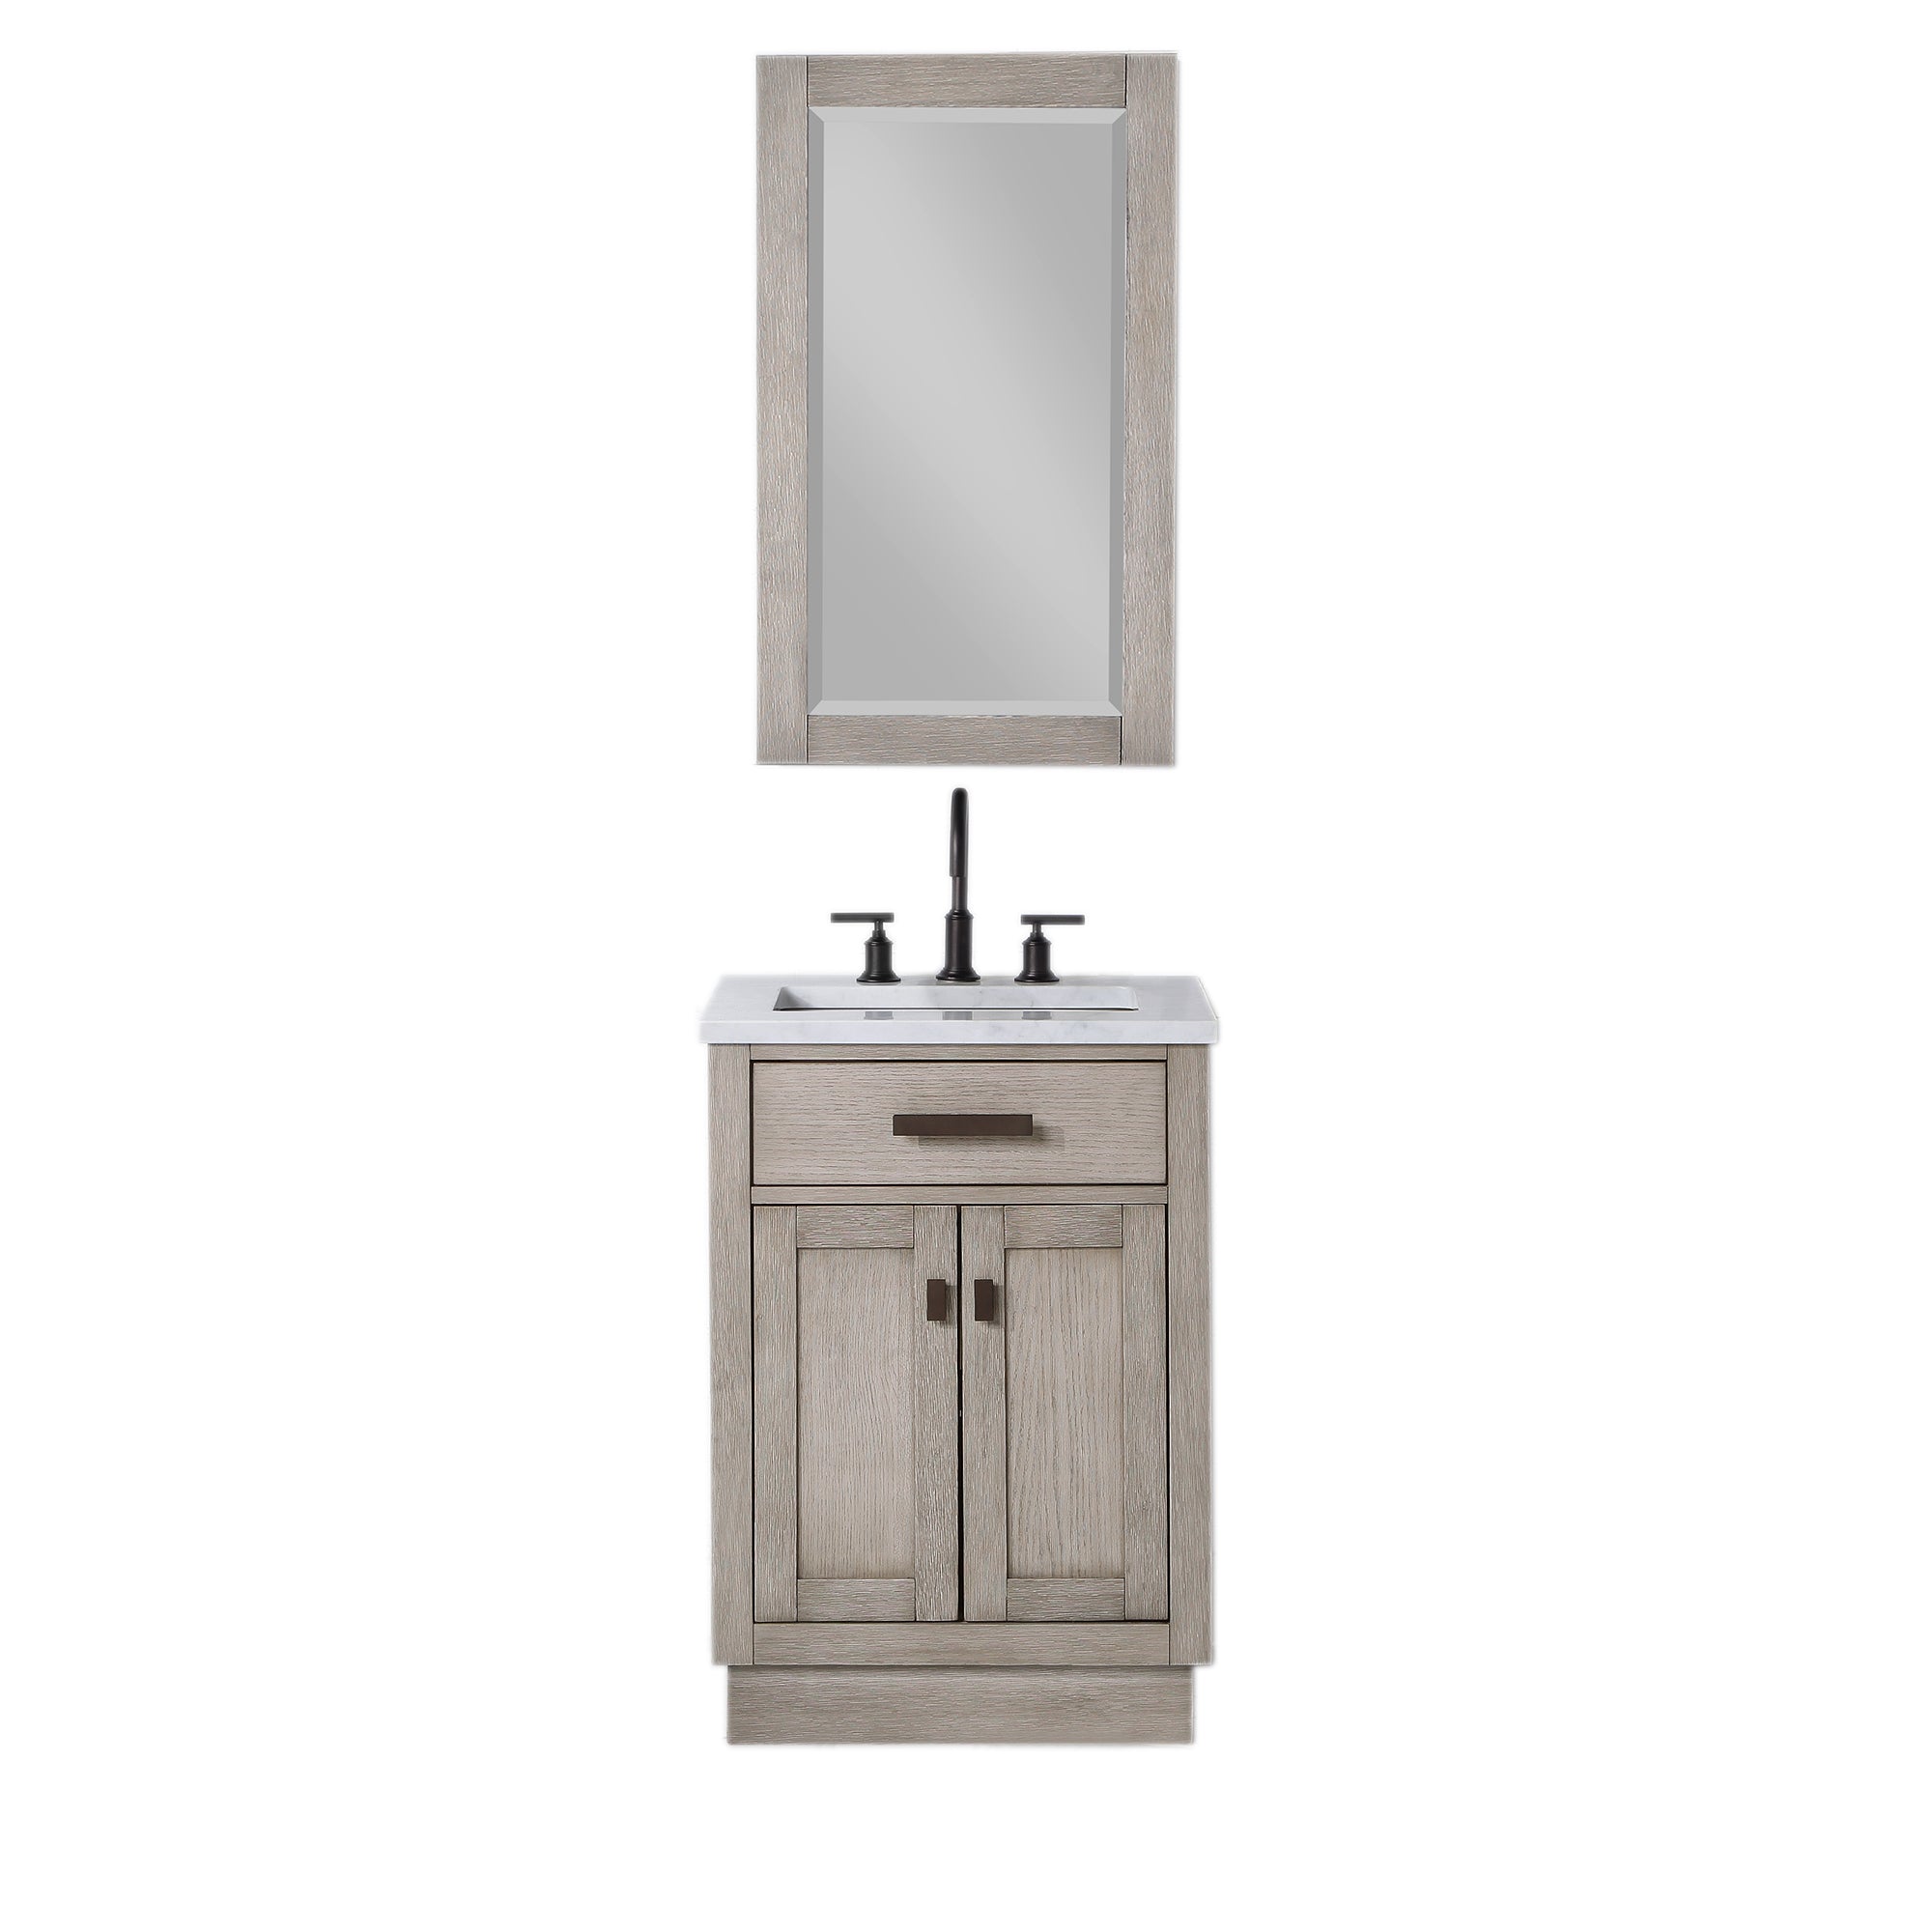 Water Creation | Chestnut 24 In. Single Sink Carrara White Marble Countertop Vanity In Grey Oak with Mirror | CH24CW03GK-R21000000